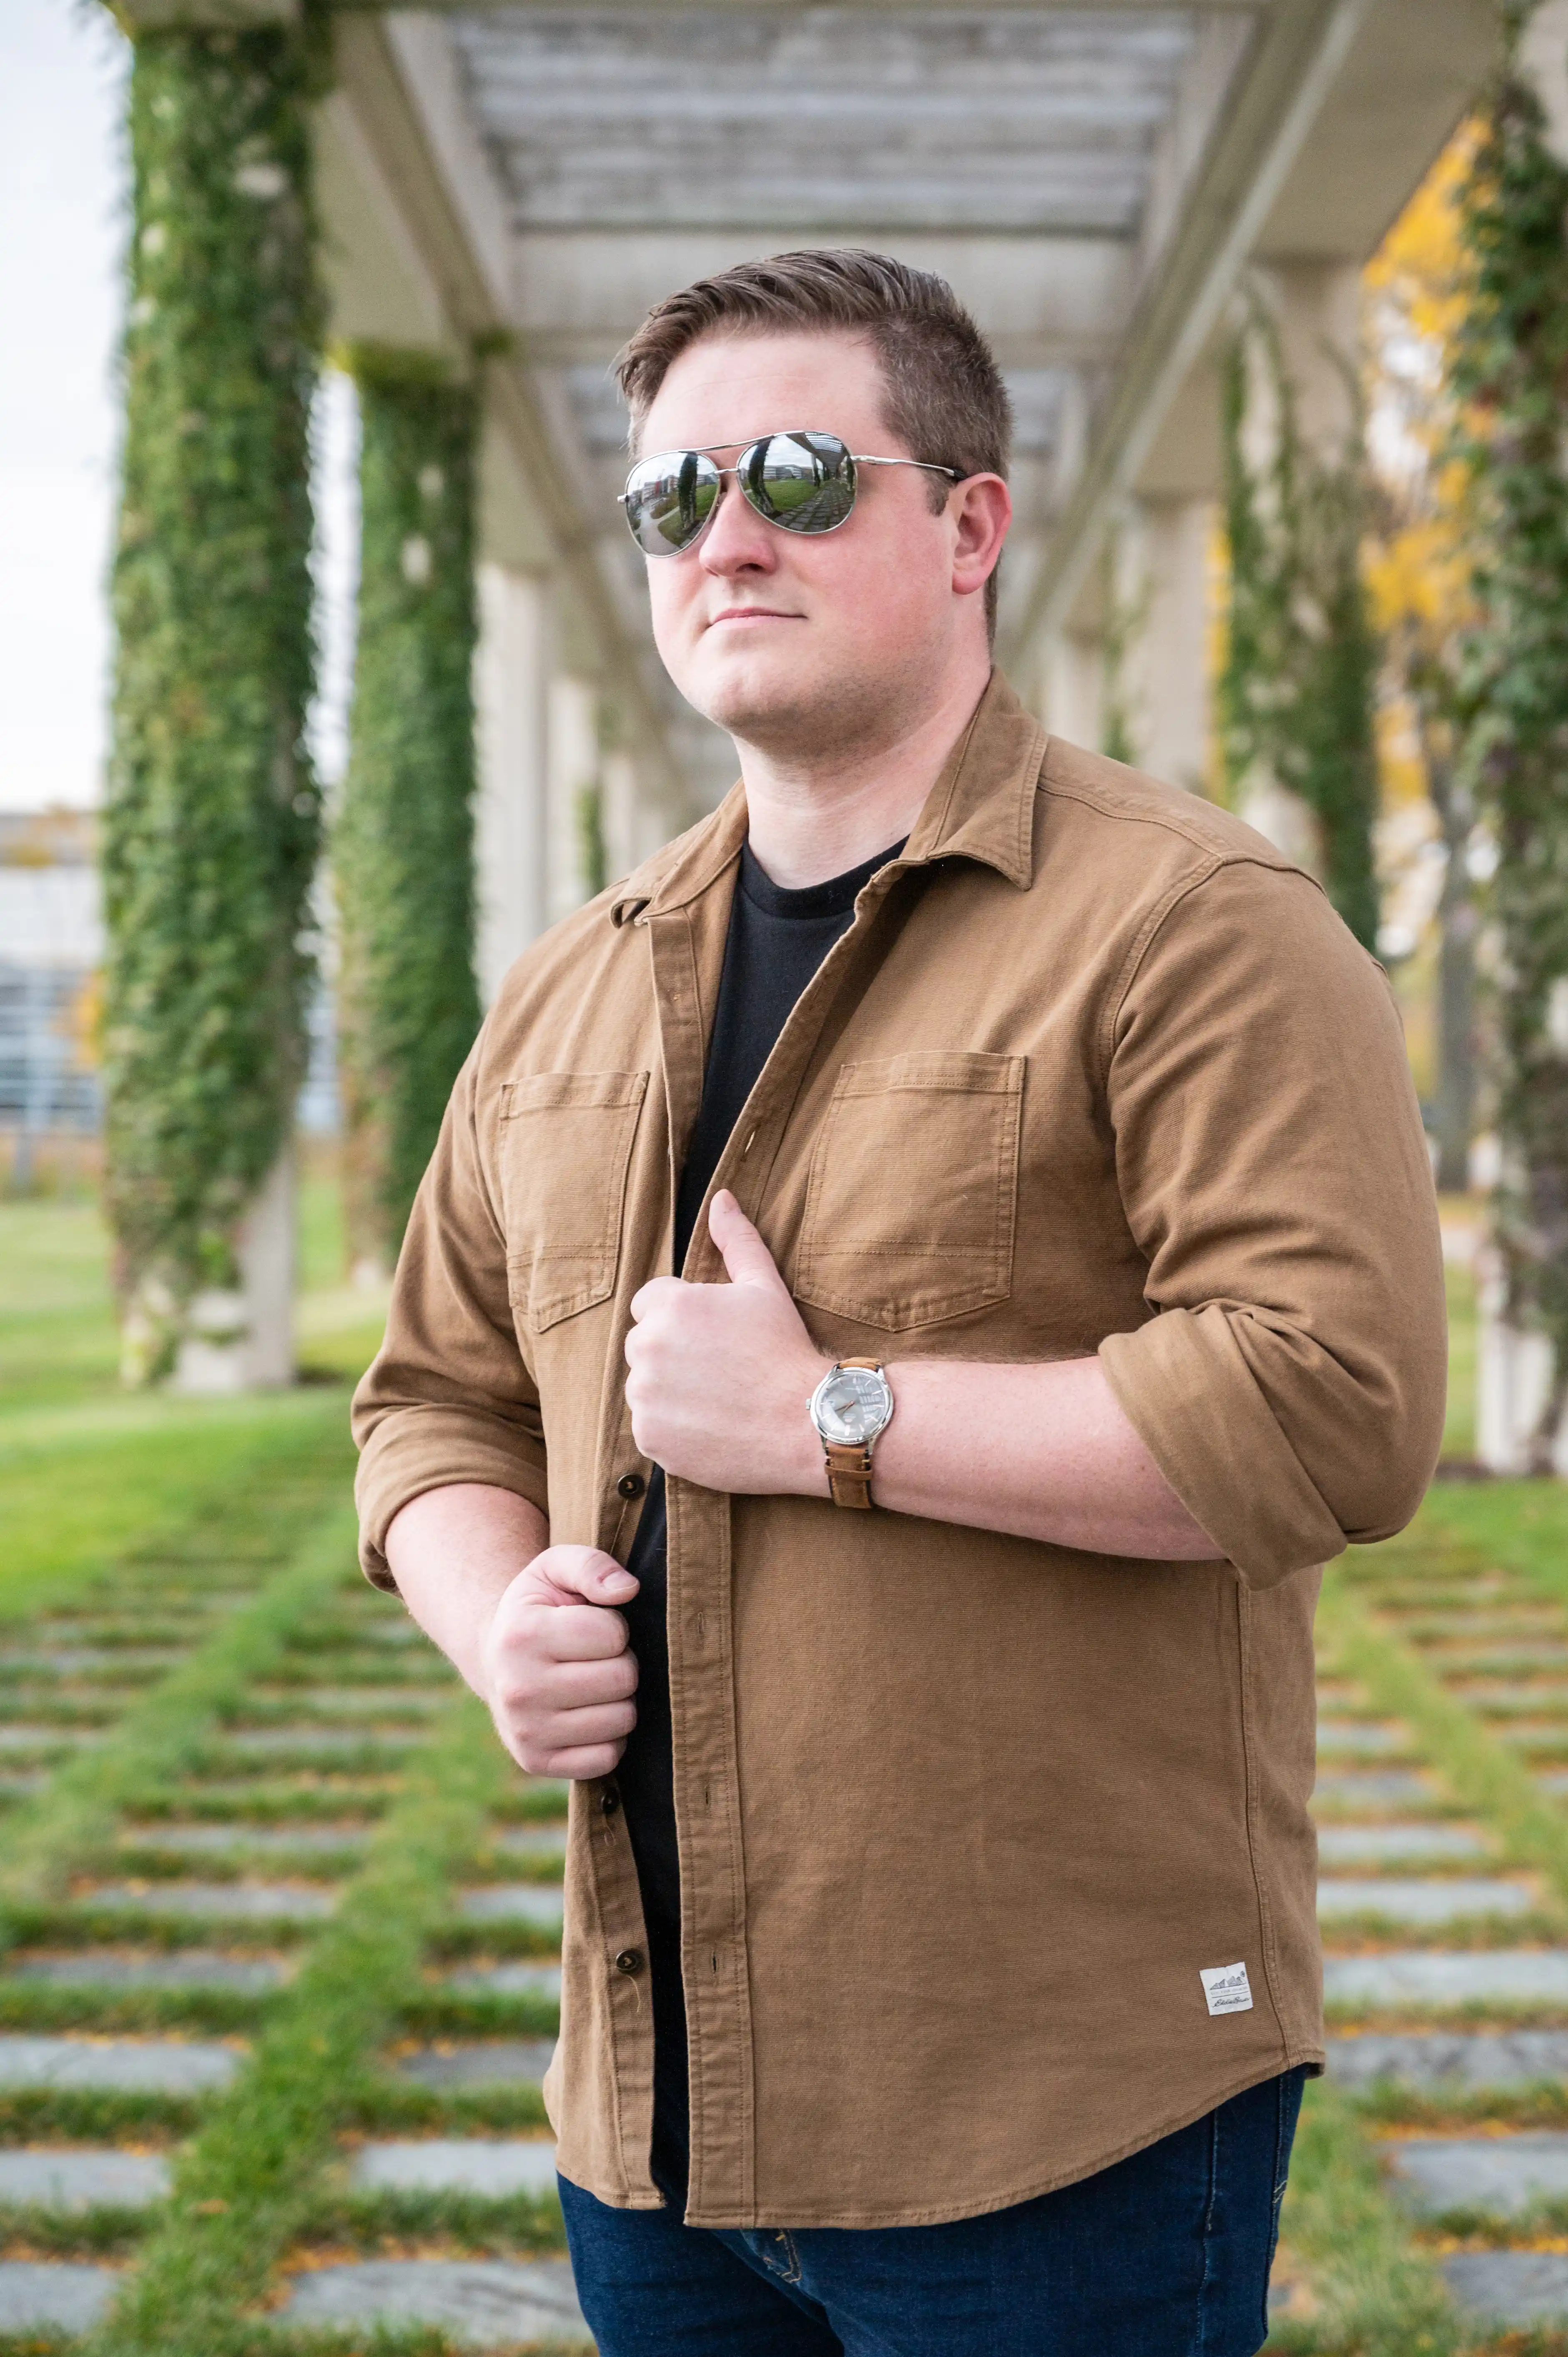 Man in sunglasses standing under a pergola with hanging greenery.